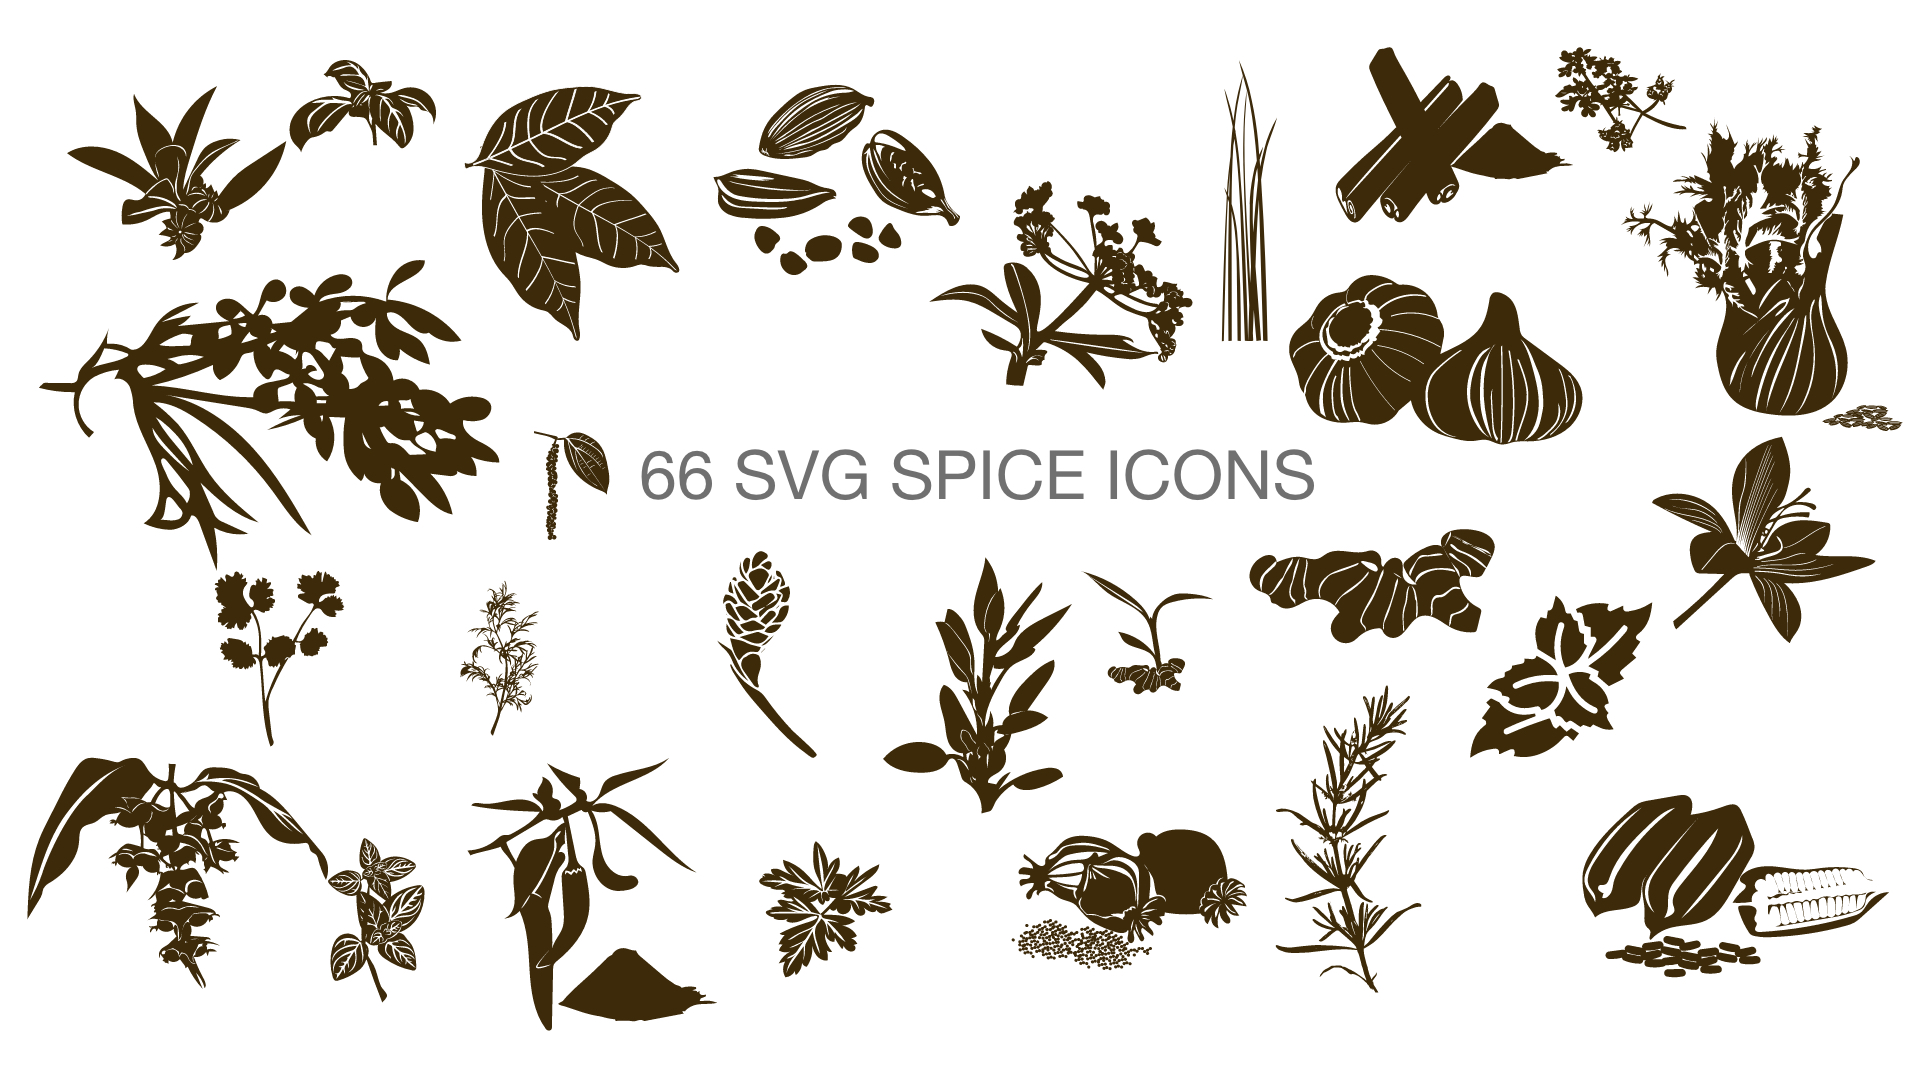 spice icons designs by Derrick Fludd